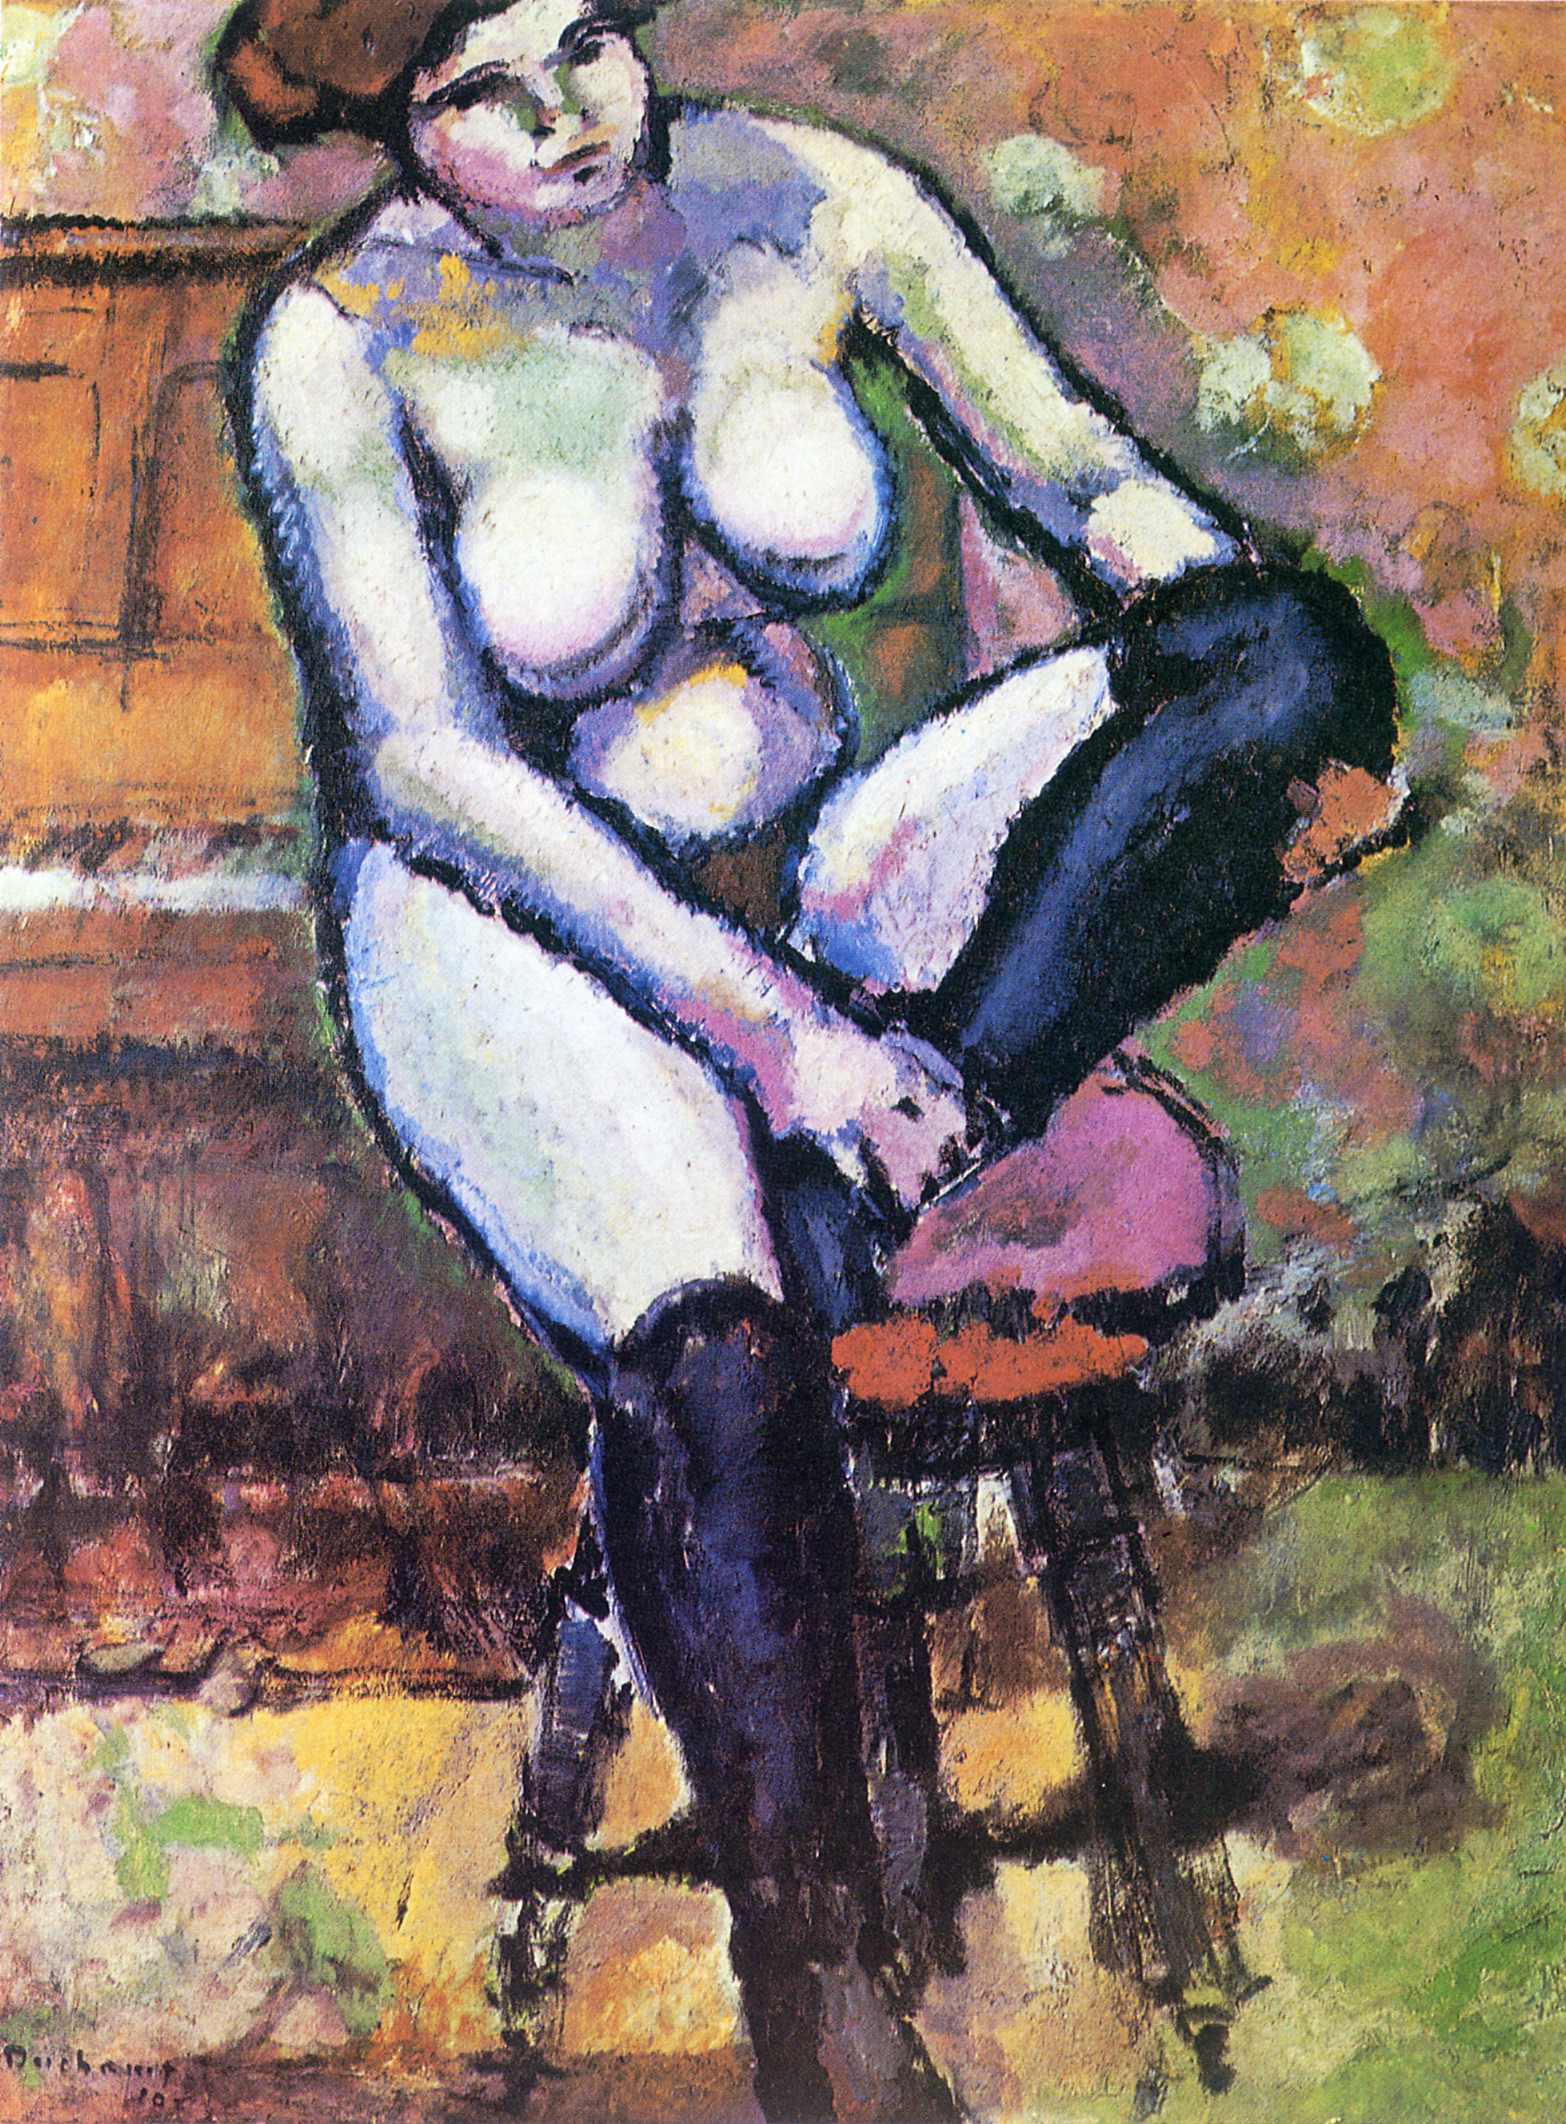 Nude with black stockings, Marcel Duchamp, 1910